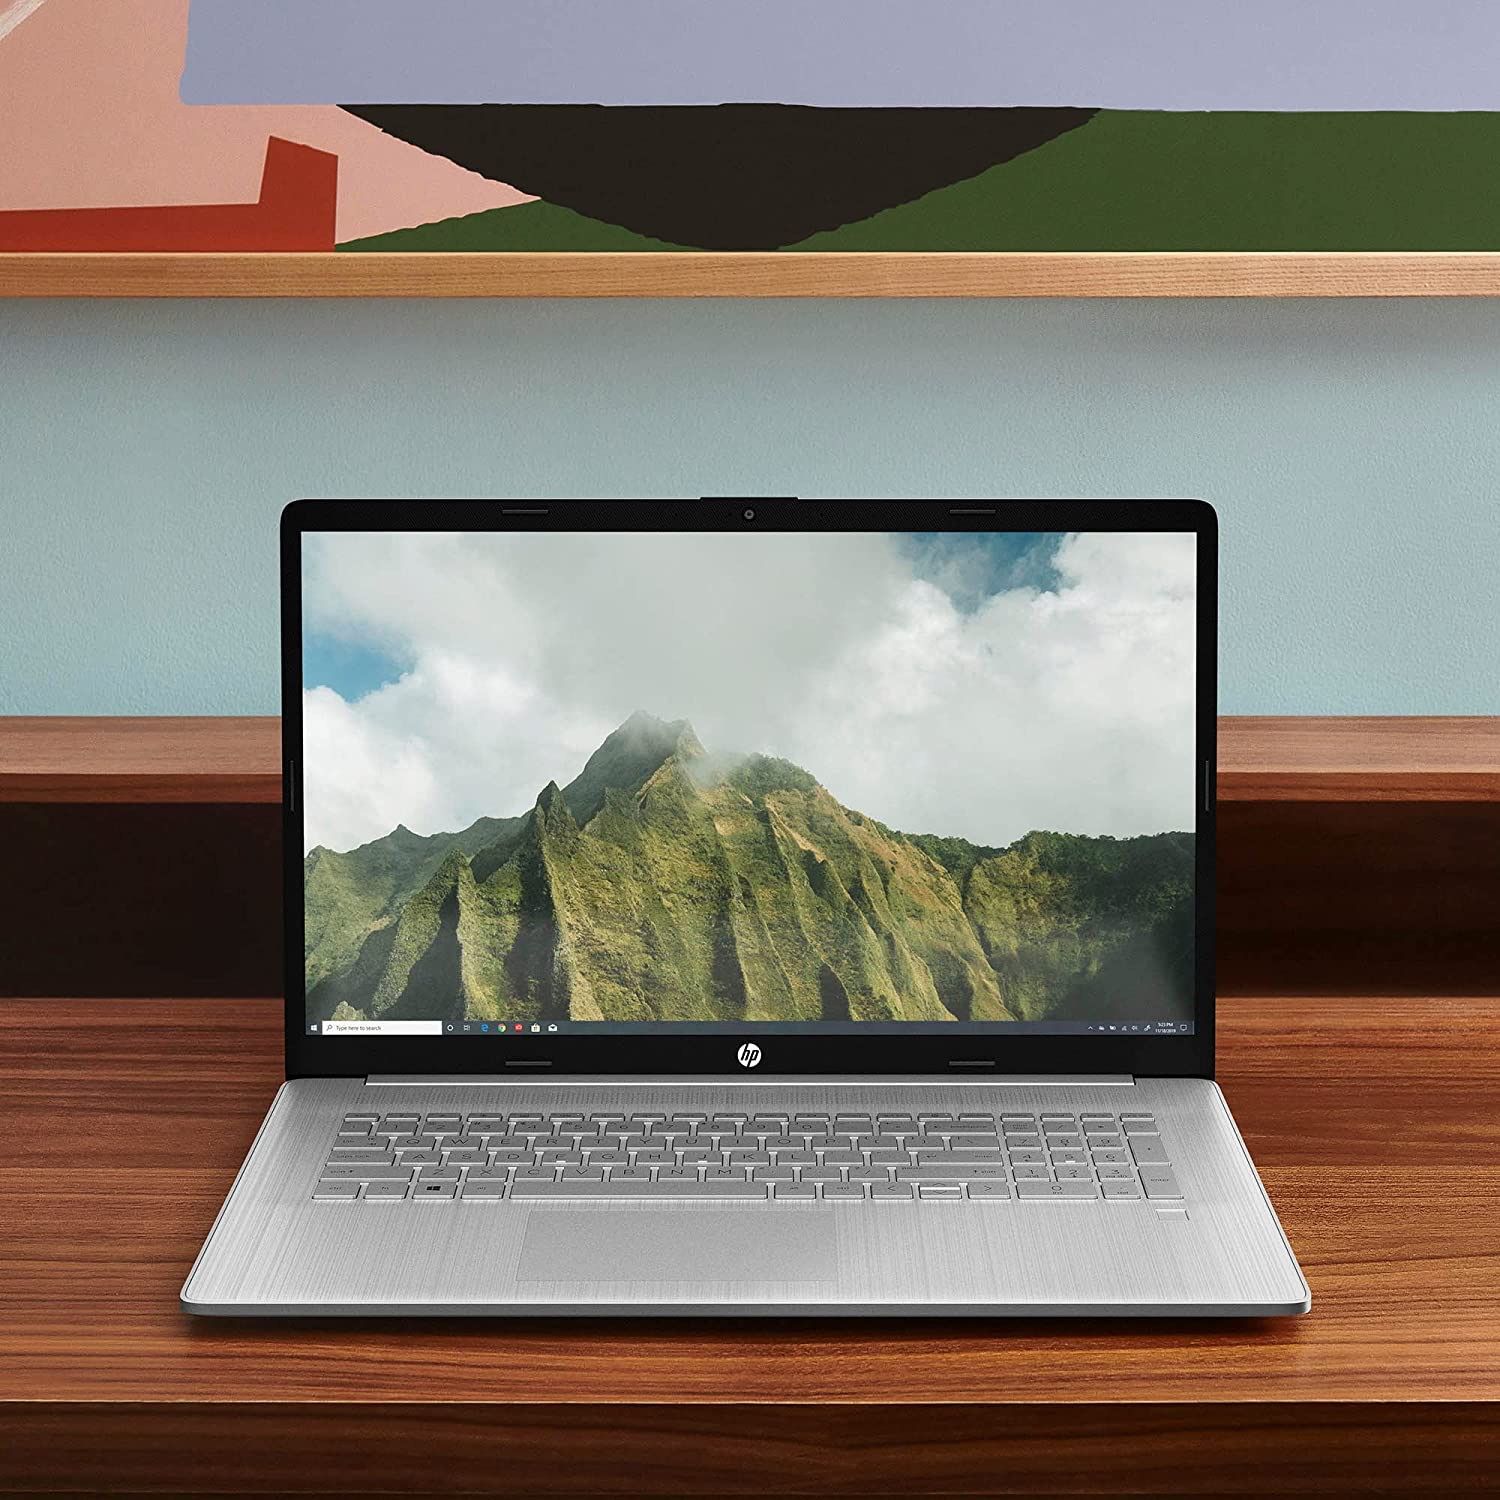 Face shot of HP Pavilion with screen showing a mountain photo illustrating the resolution